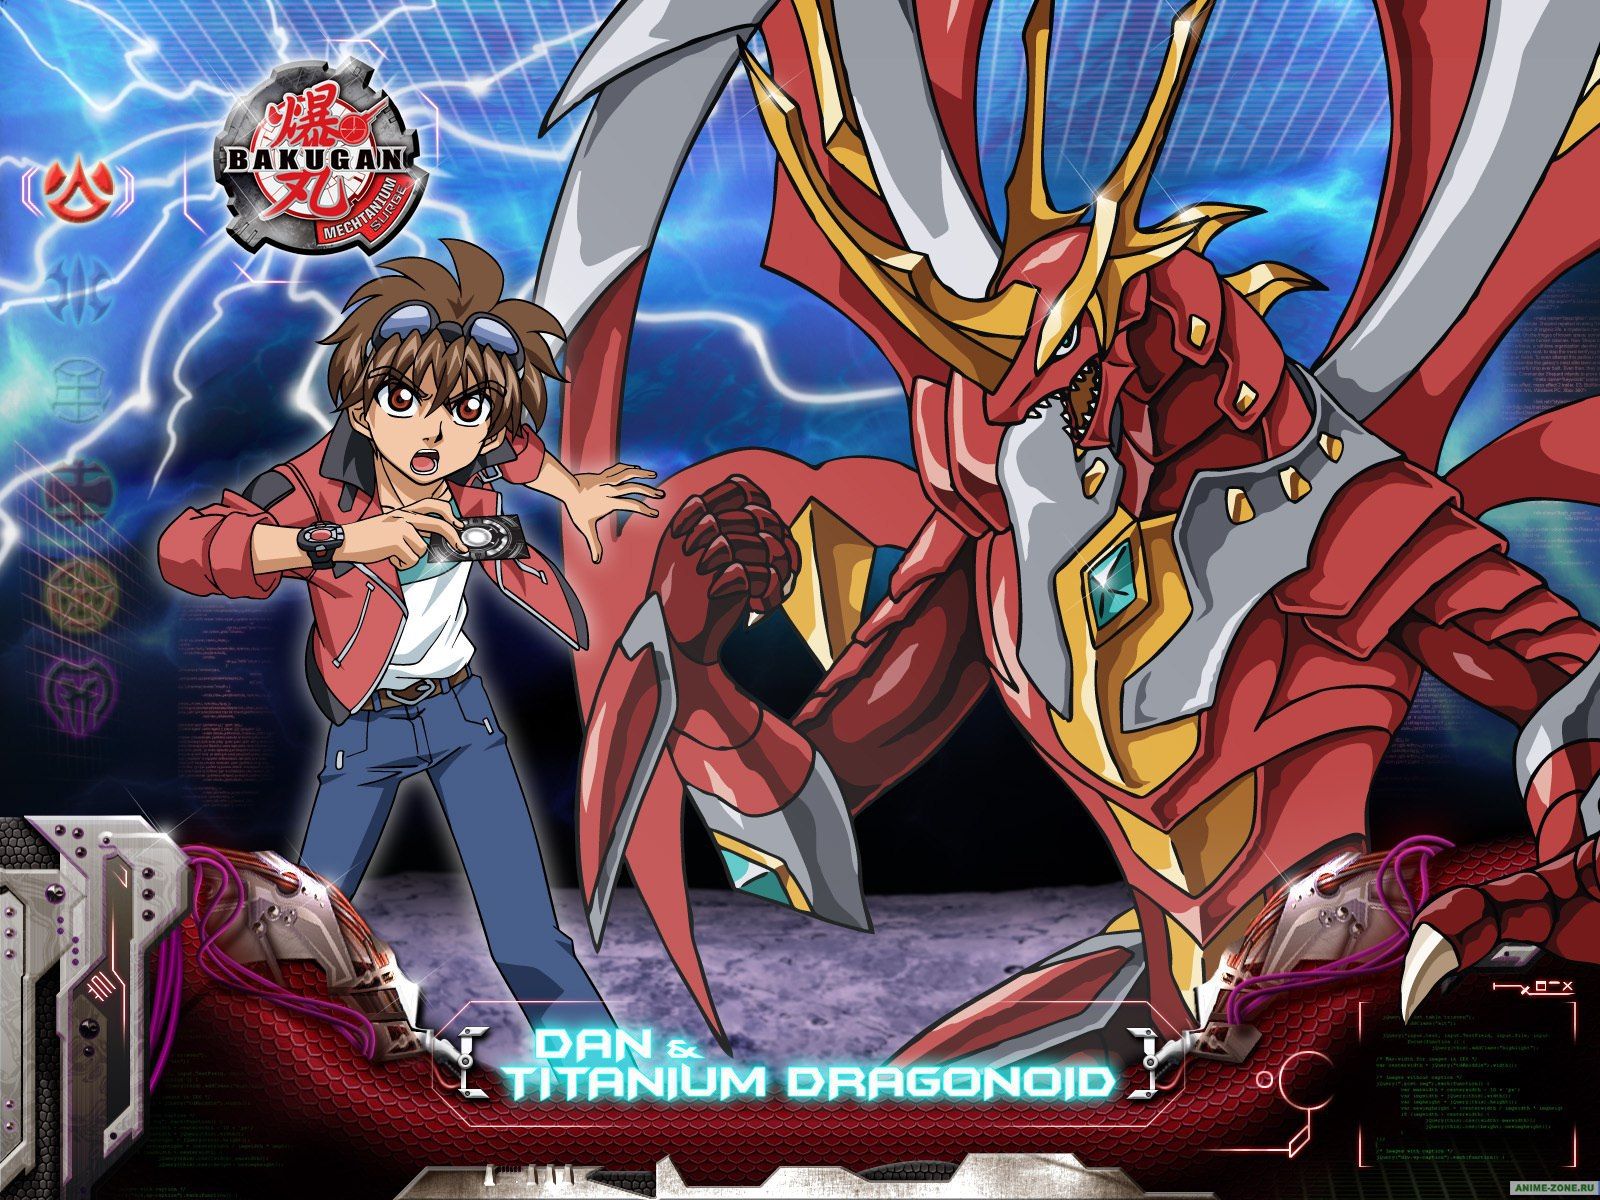 Desperate Bakugan fighters wallpapers and images - wallpapers ...